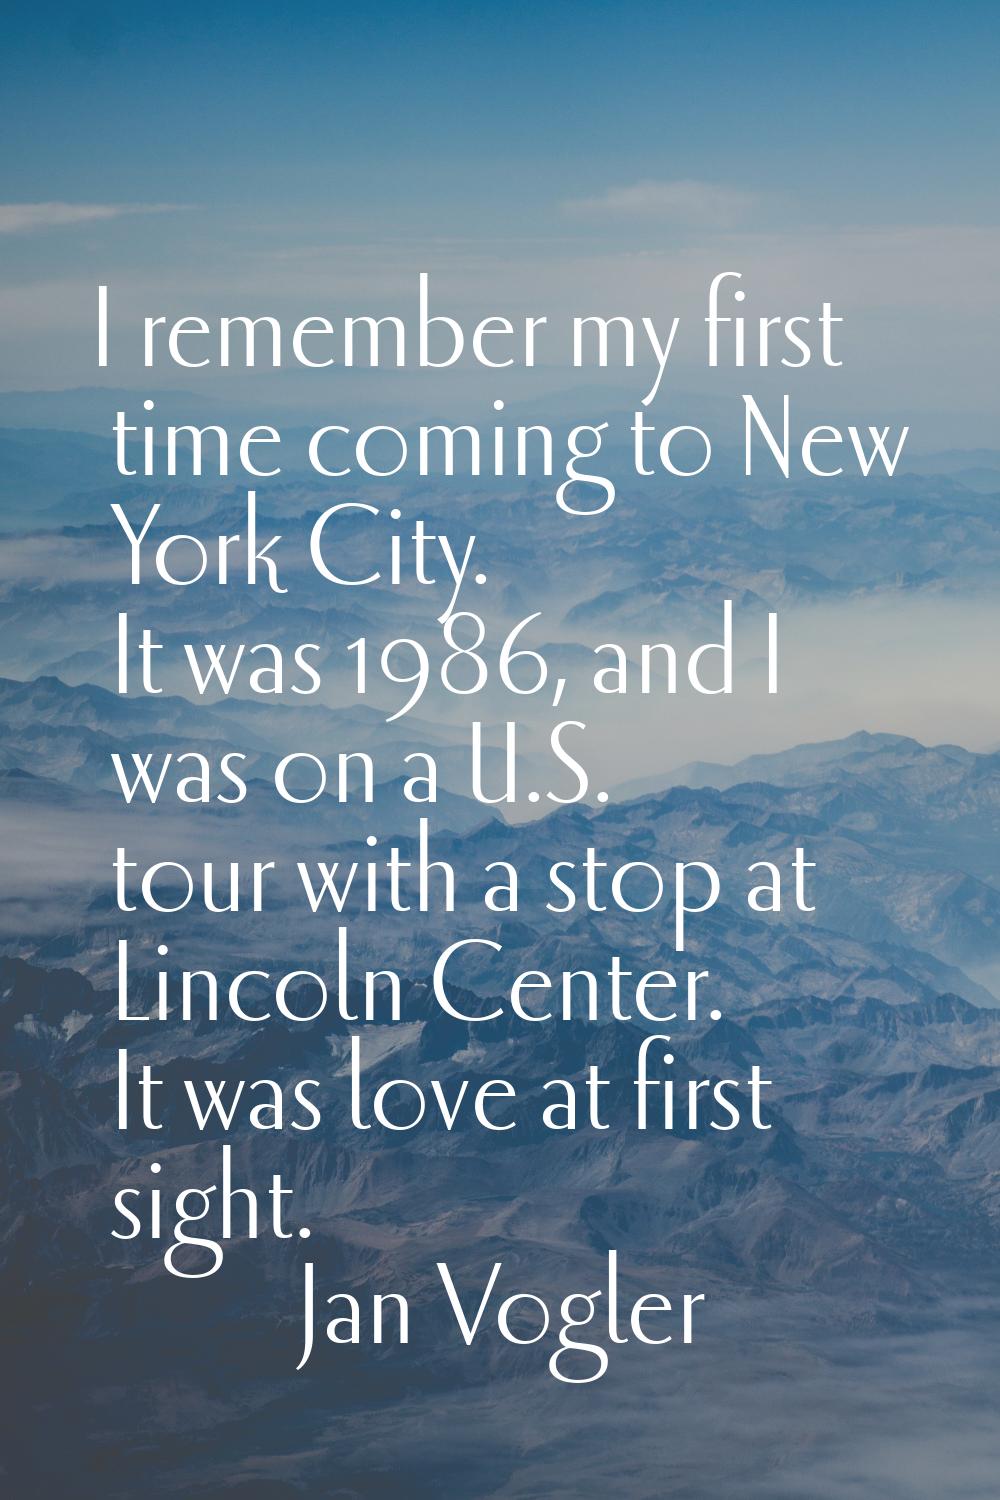 I remember my first time coming to New York City. It was 1986, and I was on a U.S. tour with a stop